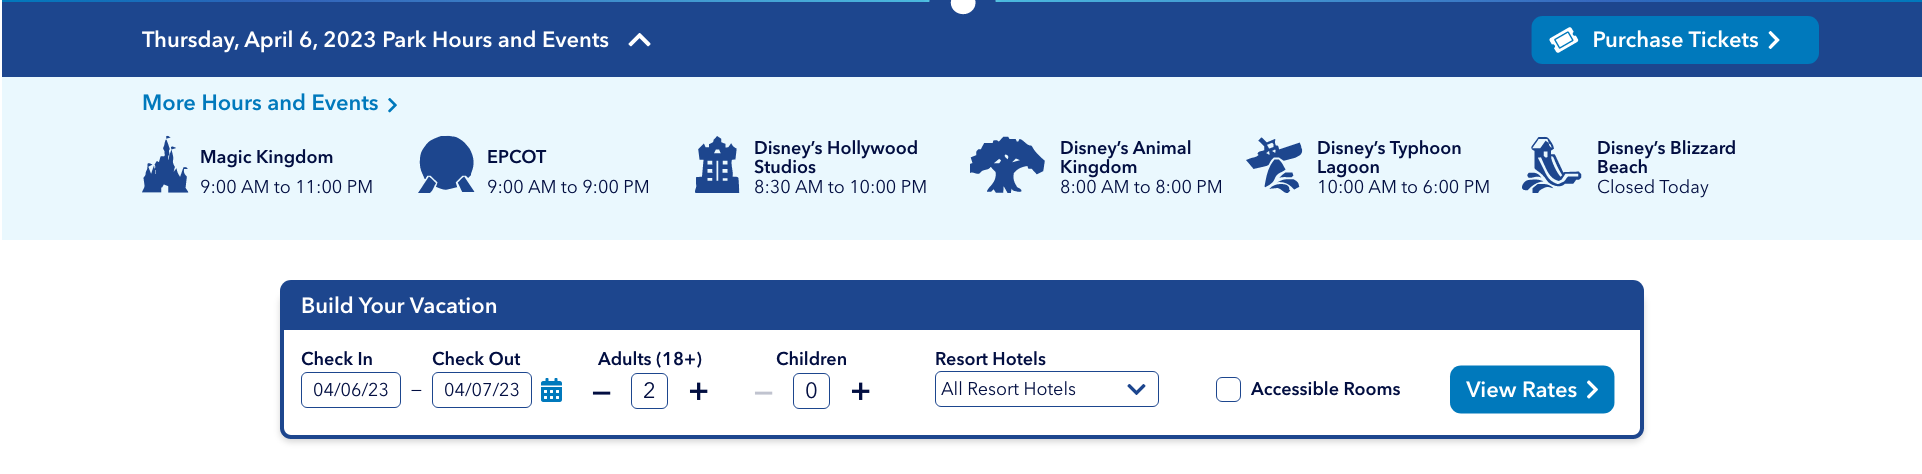 The web redesign includes park hours and a purchase tickets button